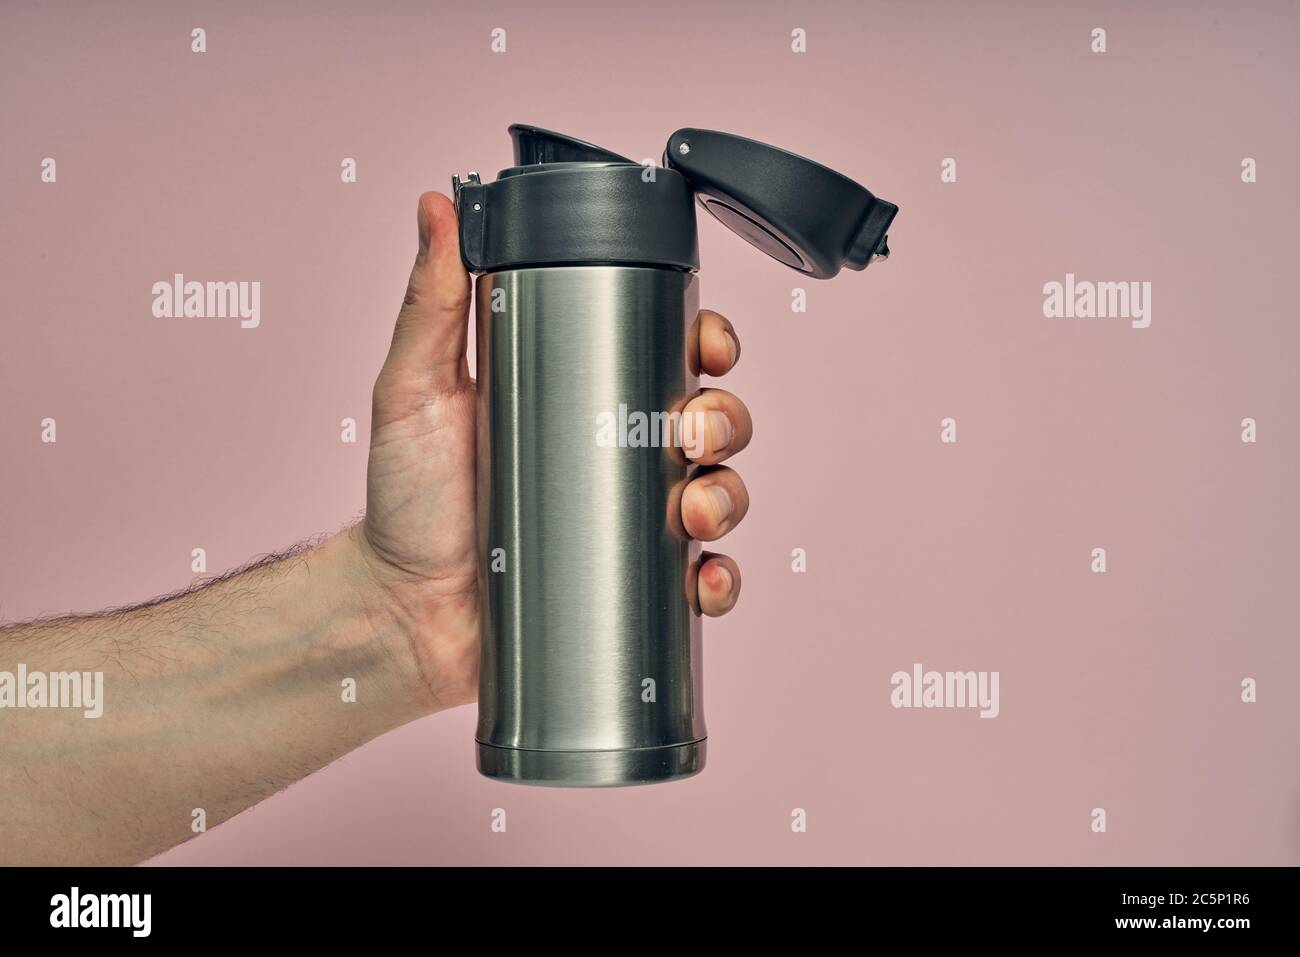 Metal mug thermos in hand on a colored background. Hot drinks on the go. Thermo mug. Stock Photo